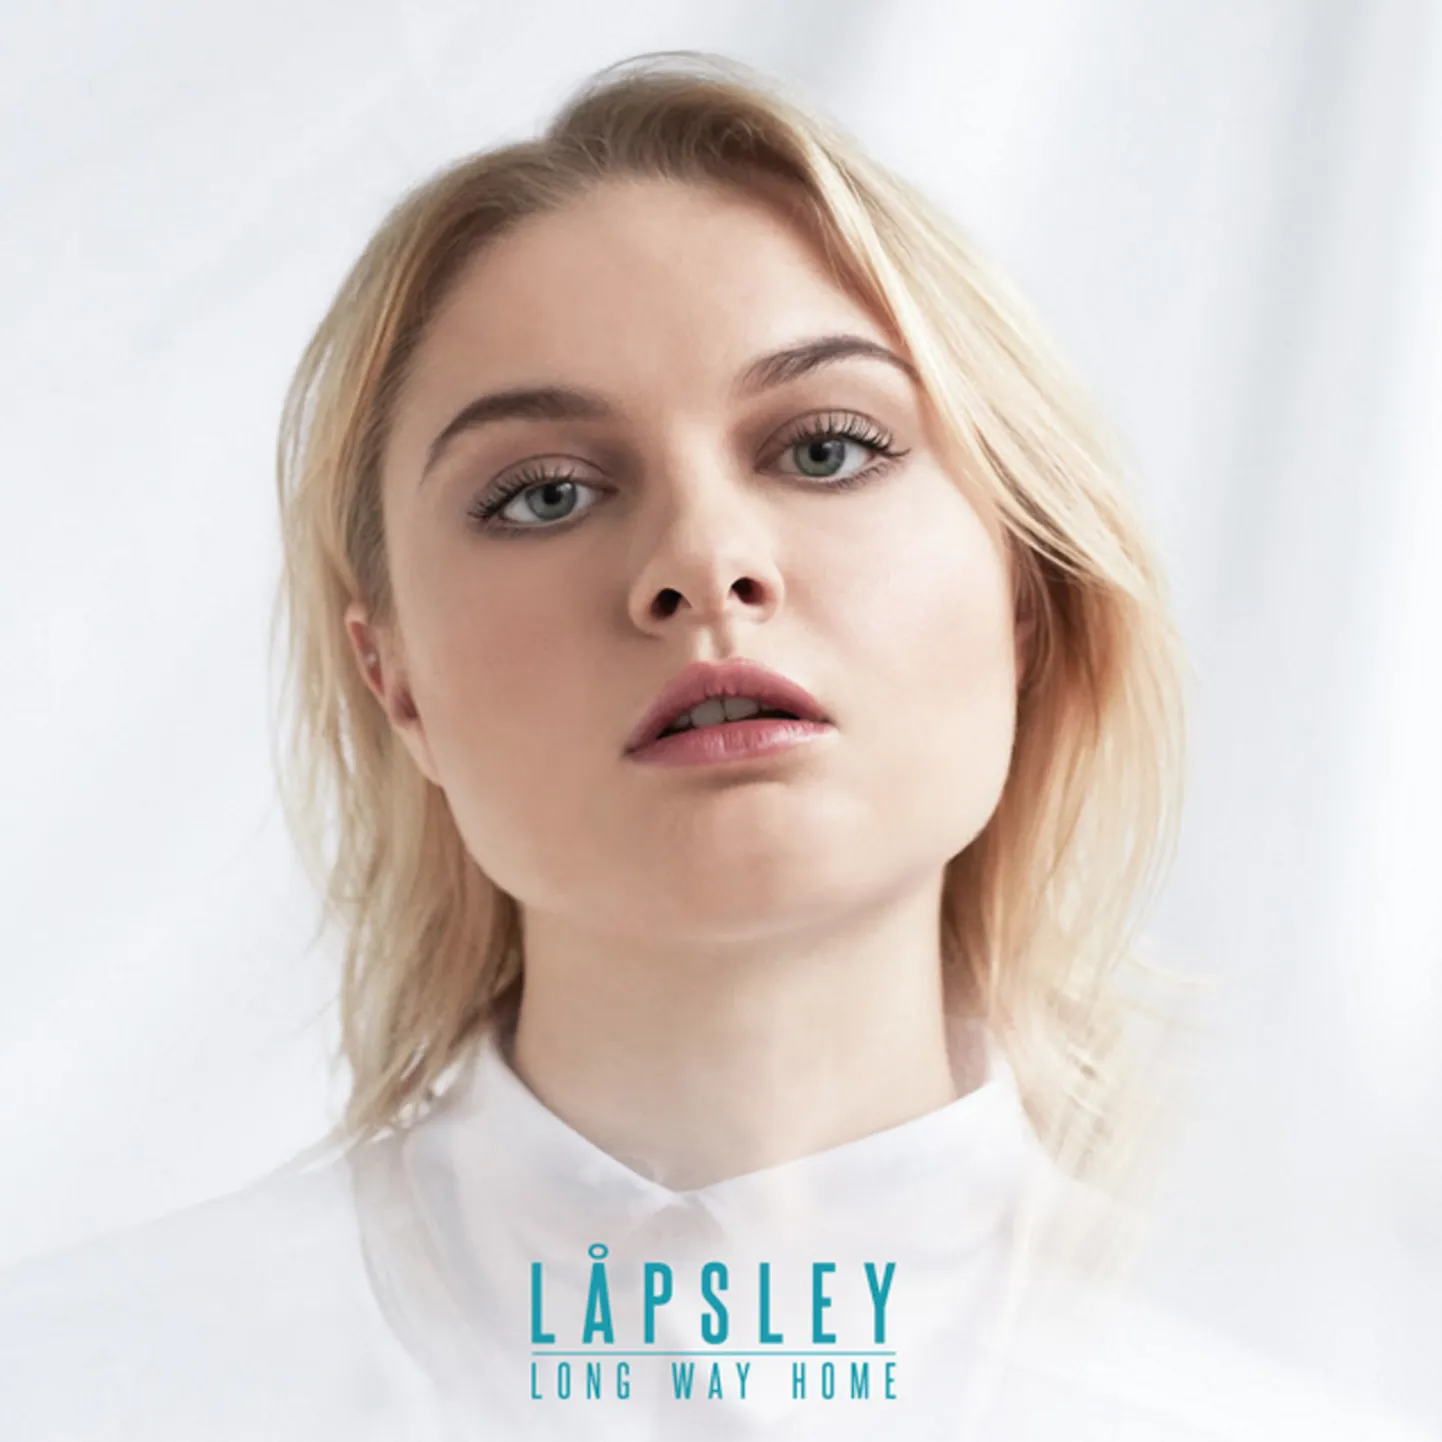 Lapsley- All Way Home